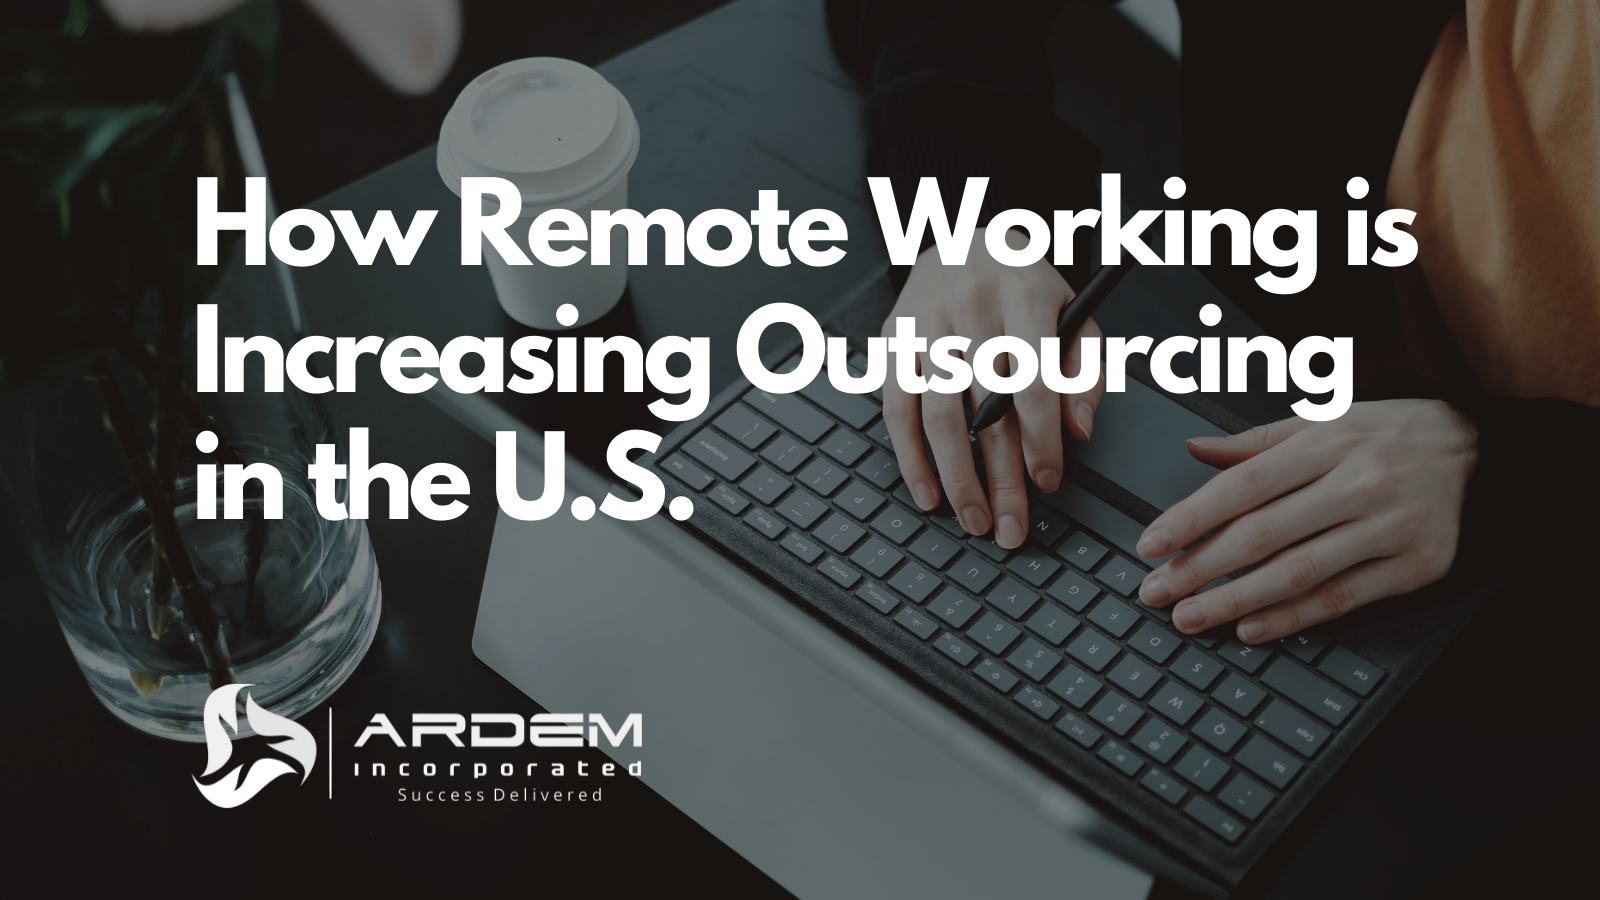 Remote Working Increasing Outsourcing in US